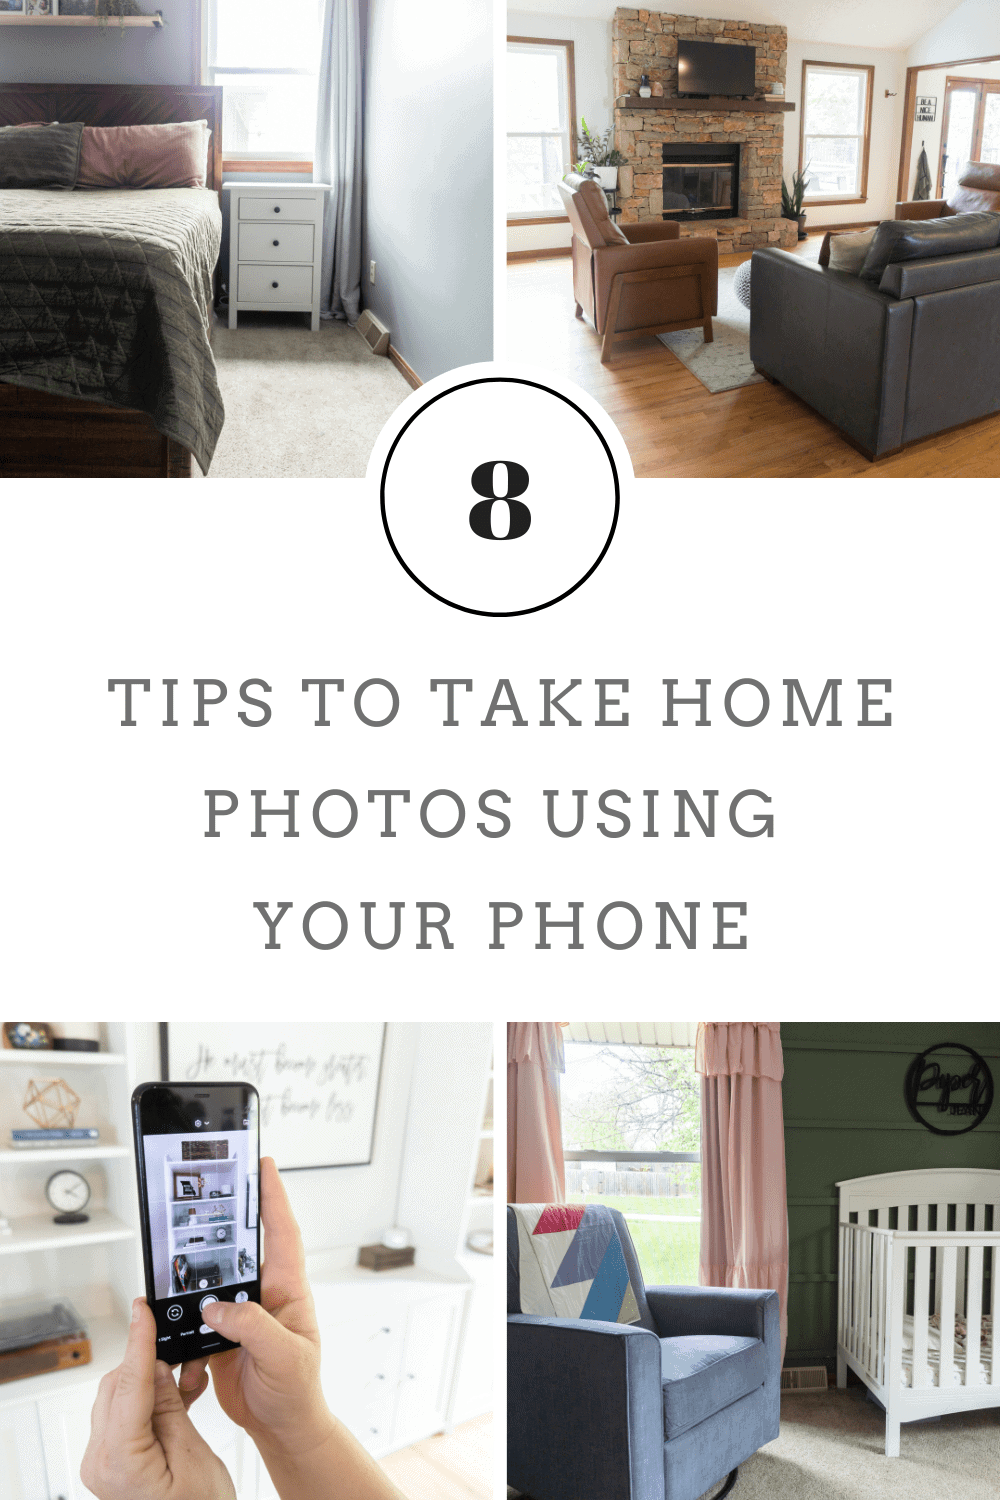 8 tips to take photos of your home using your phone